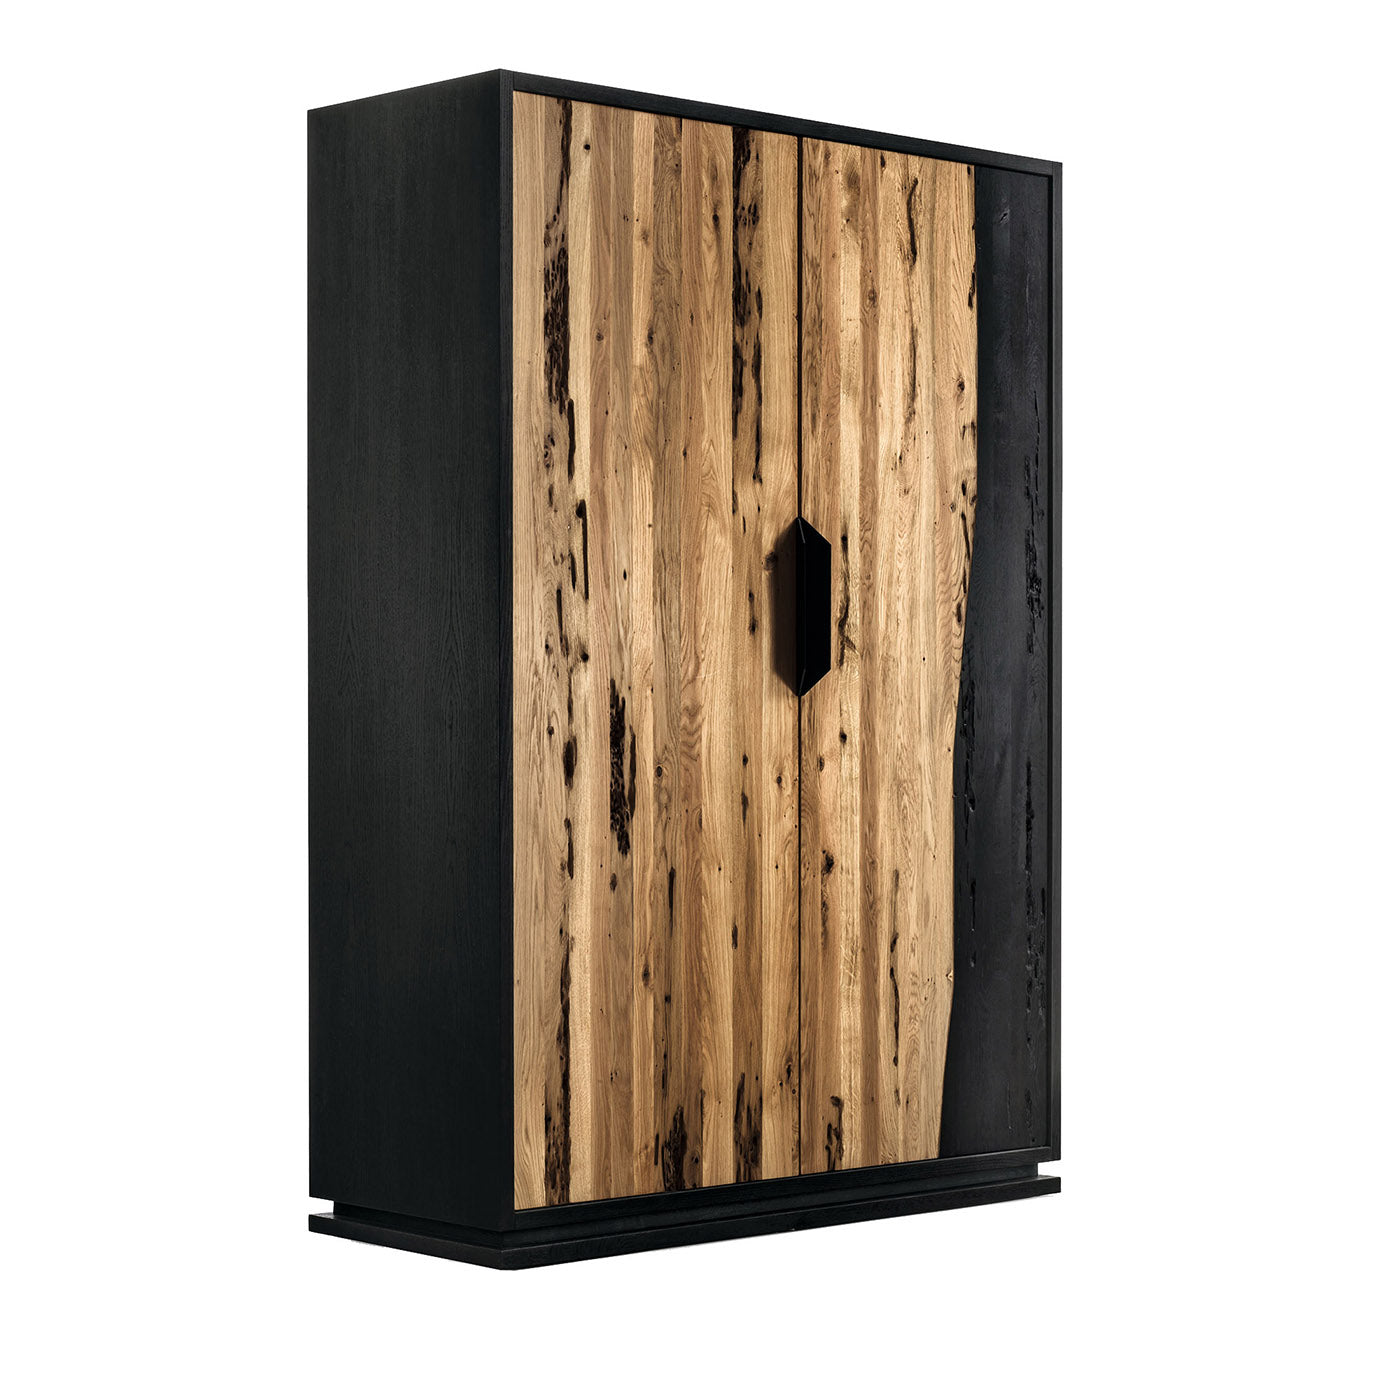 Fire High Black Cabinet by Marco Piva - Main view